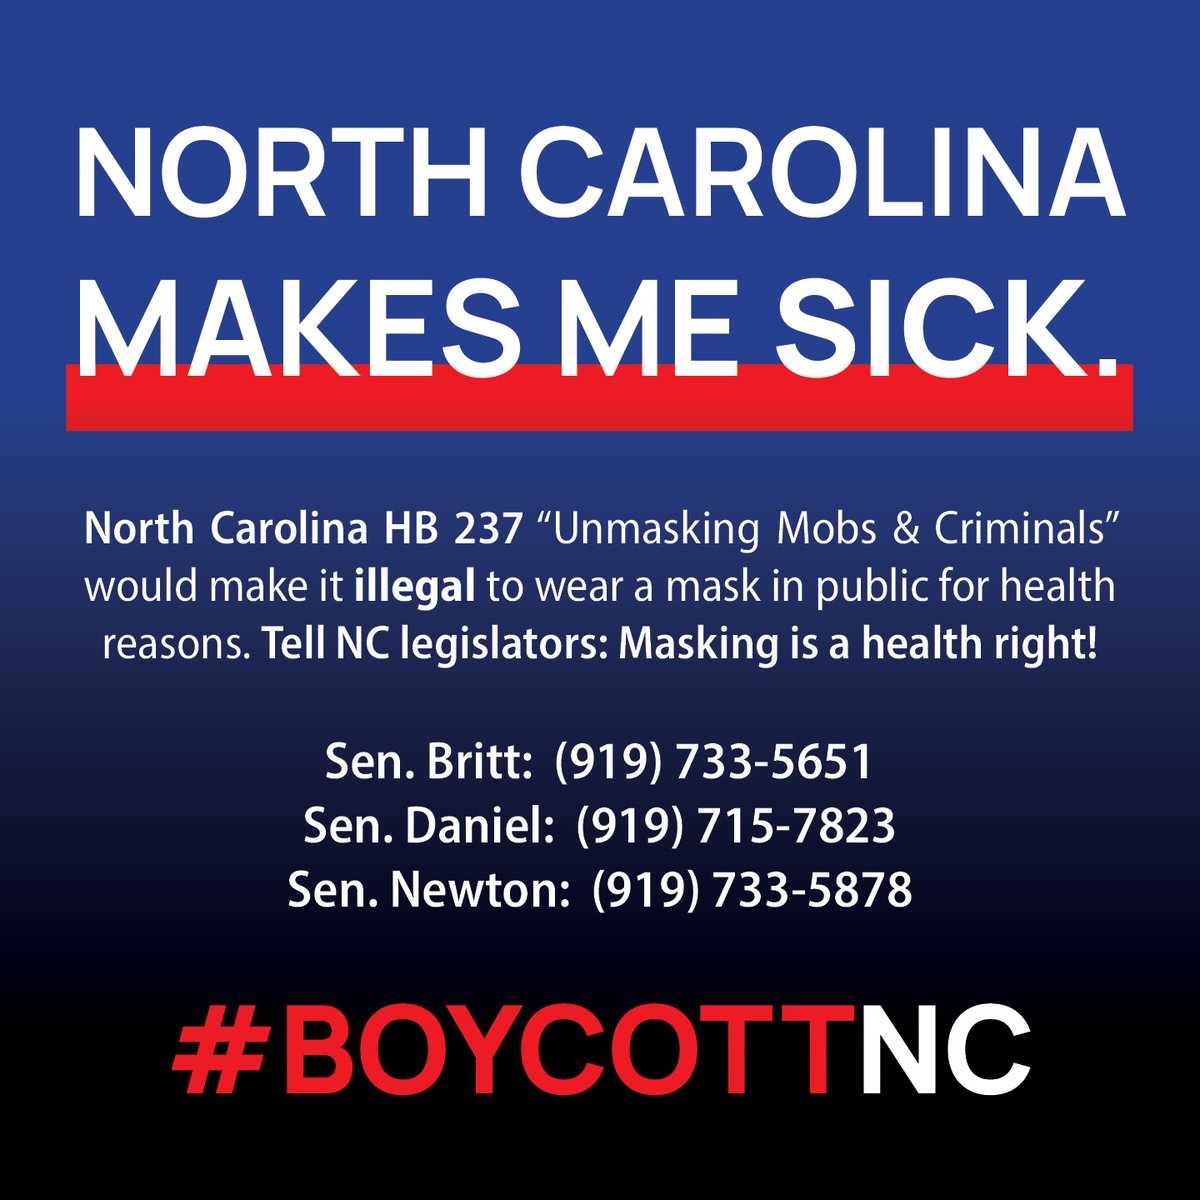 petition to sign below! 😷🥰⤵️ here in California, wearing a mask to protect & defend my health in public (and on the job) is a legal right. tell #NorthCarolina we expect no less! #BoycottNC